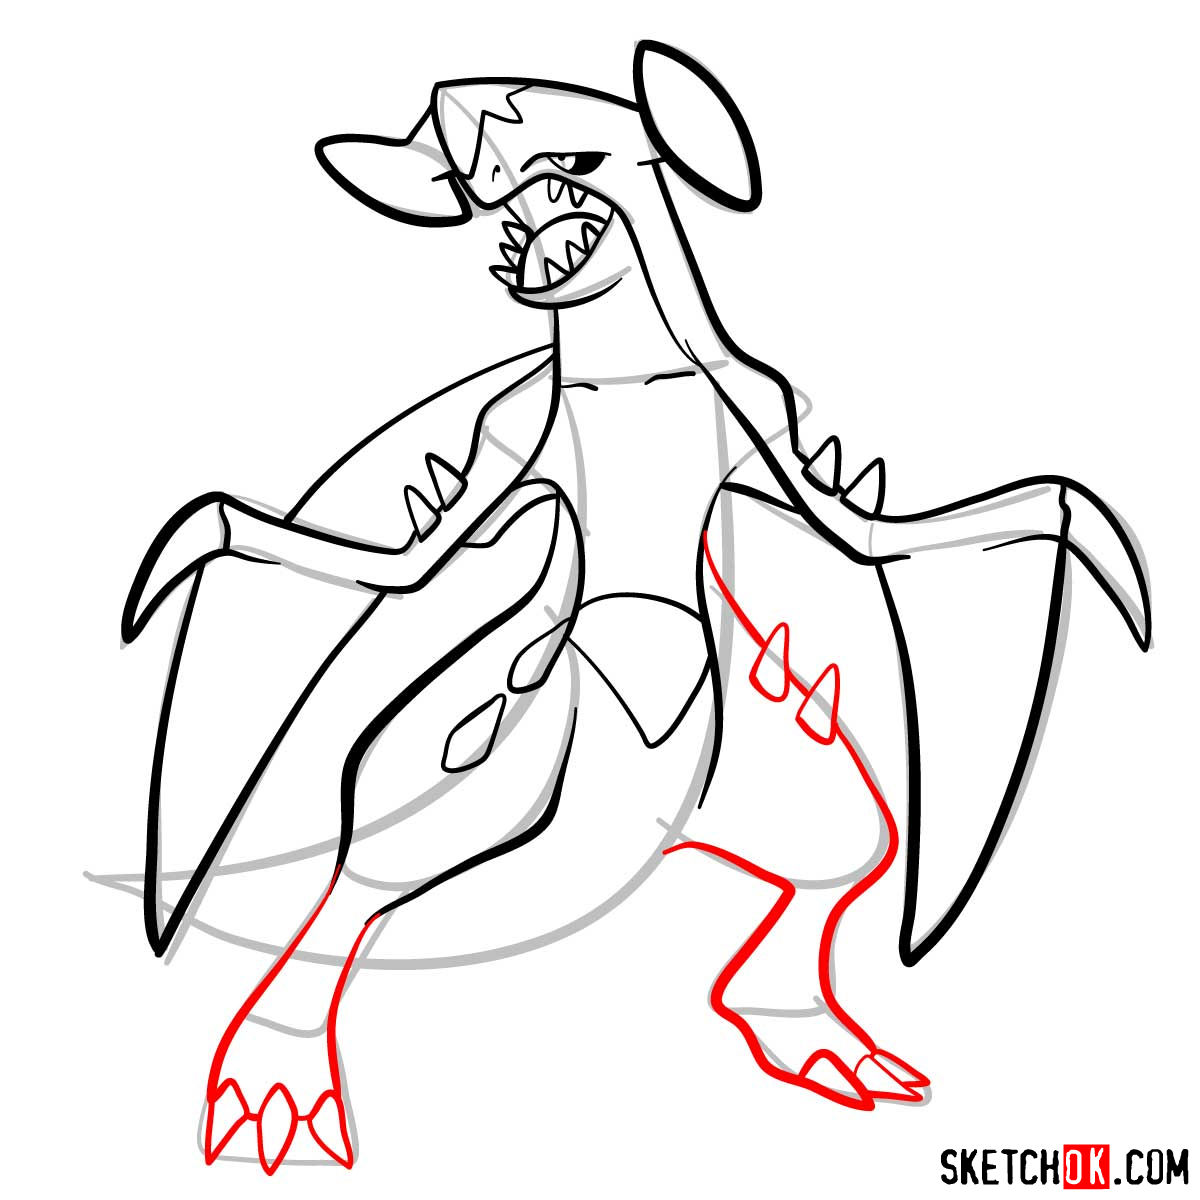 How to draw Garchomp | Pokemon - Step by step drawing ...